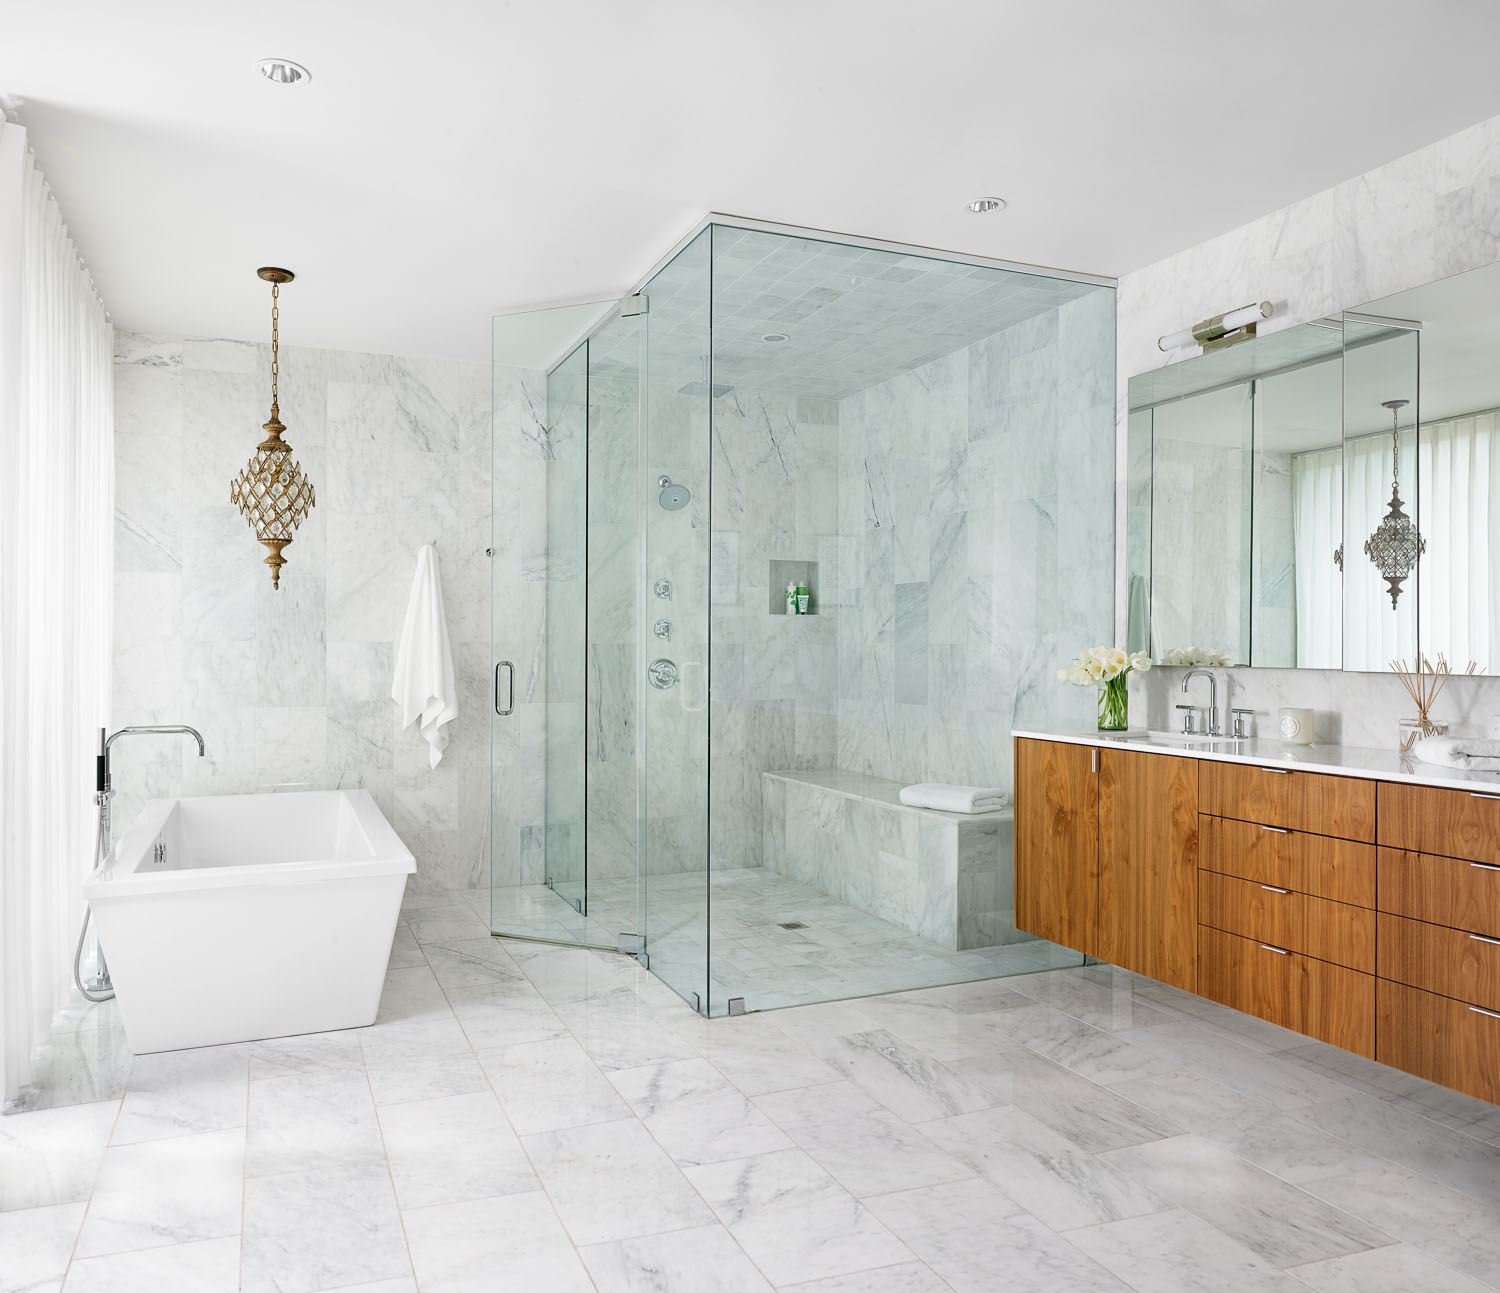 Marble floors and walls provide a spa liking feeling within the master bath.